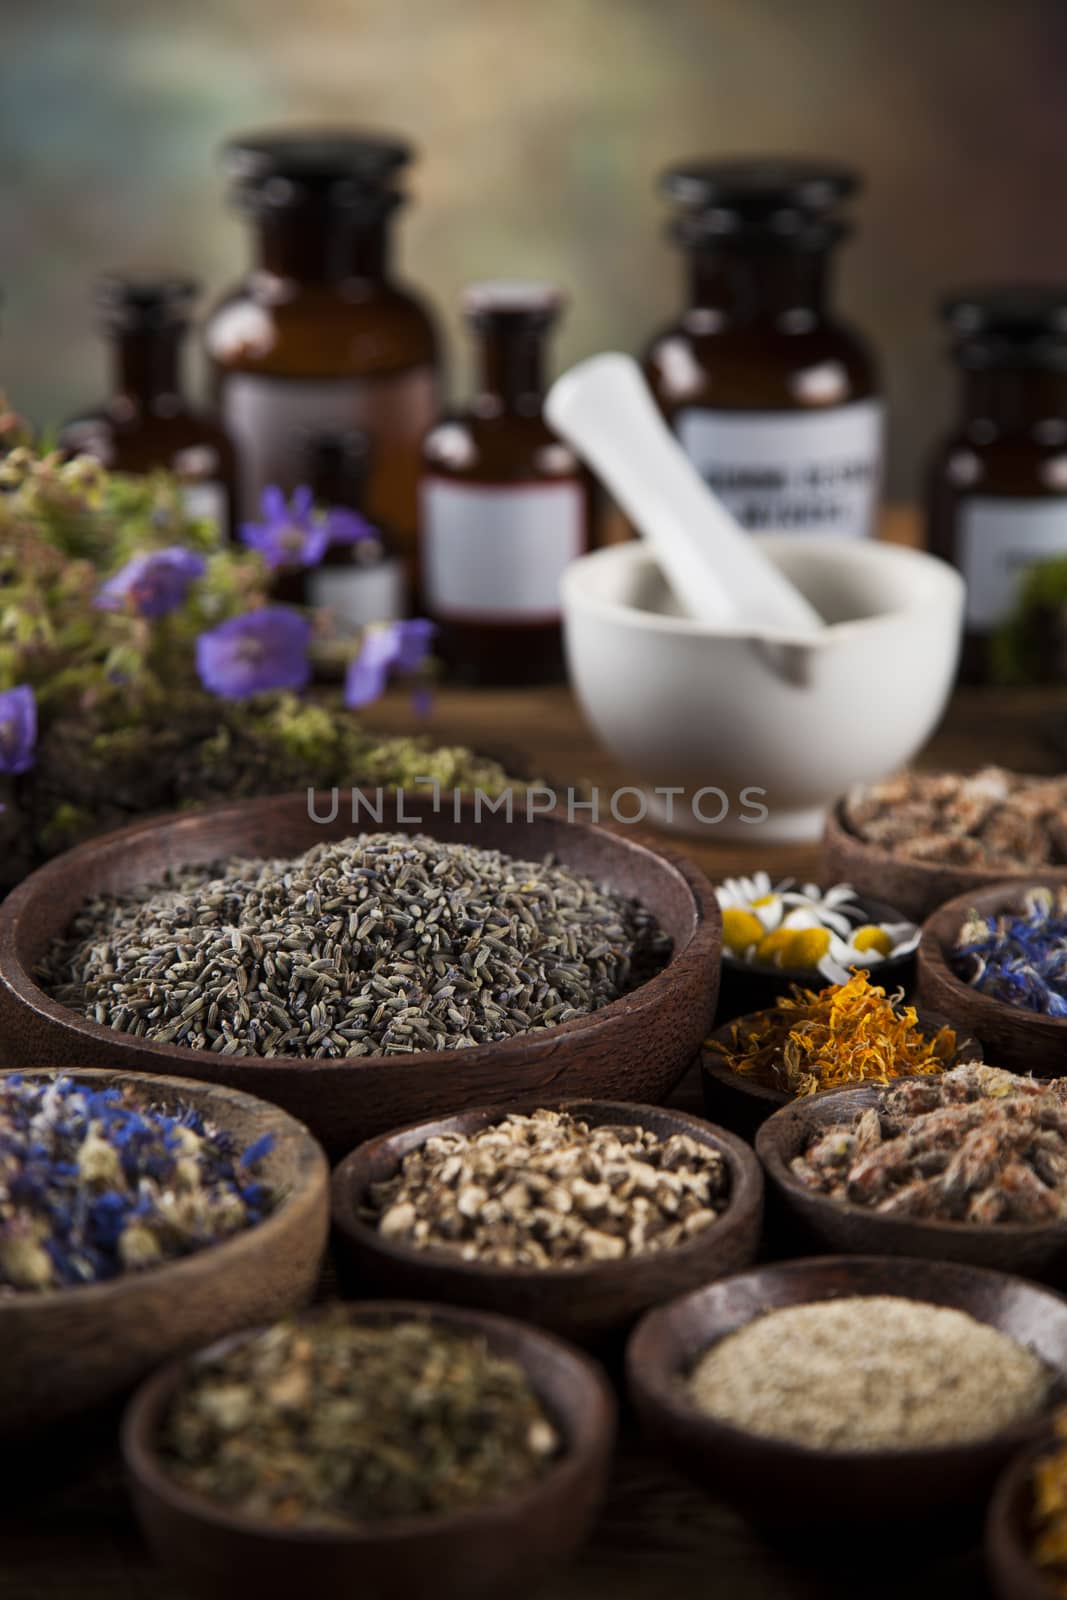 Healing herbs on wooden table, mortar and herbal medicine  by JanPietruszka